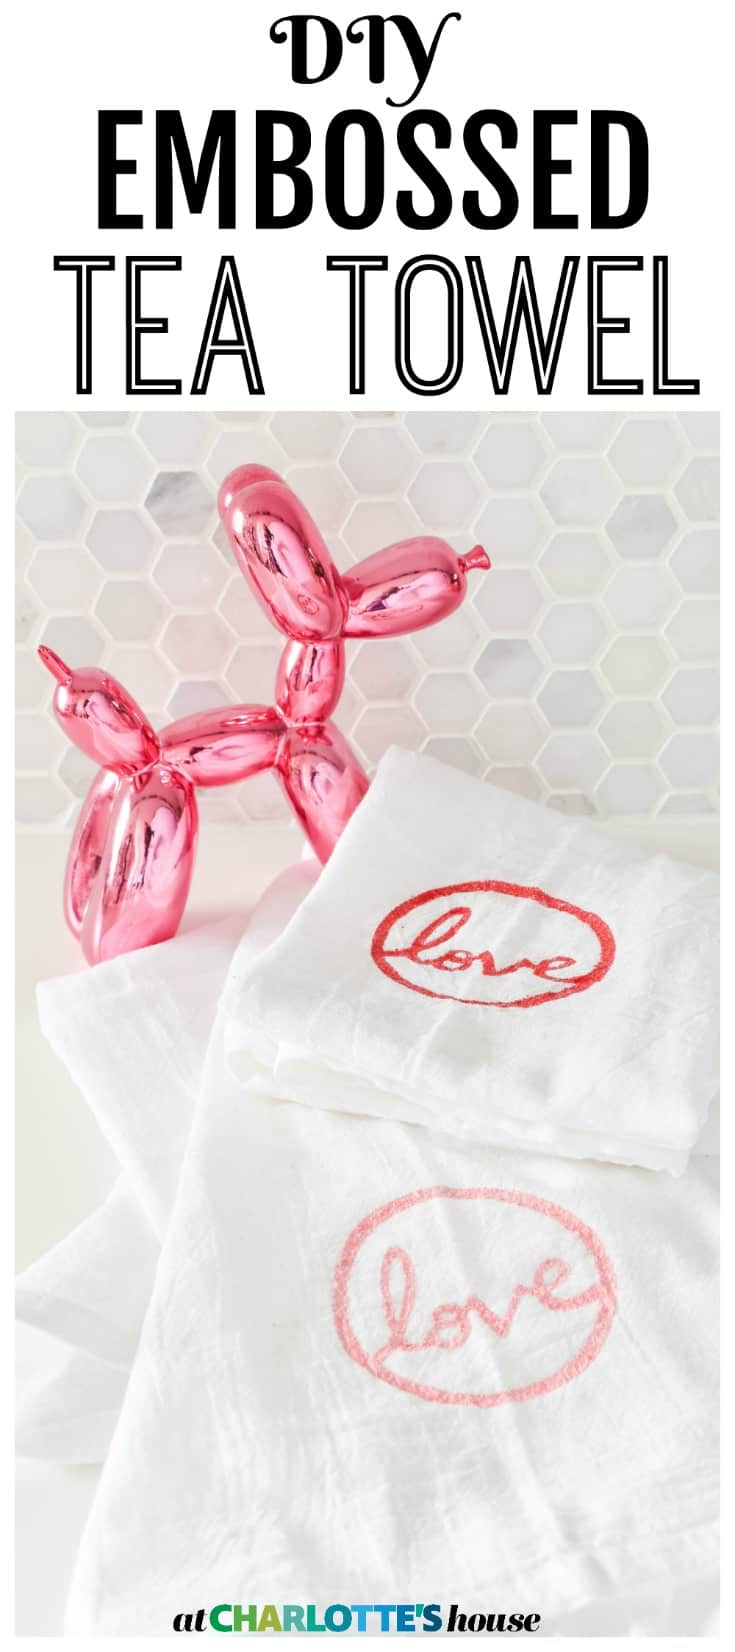 These handmade embossed towels were so fun to make using my Homeright heat gun and they're perfect for Valentine's day